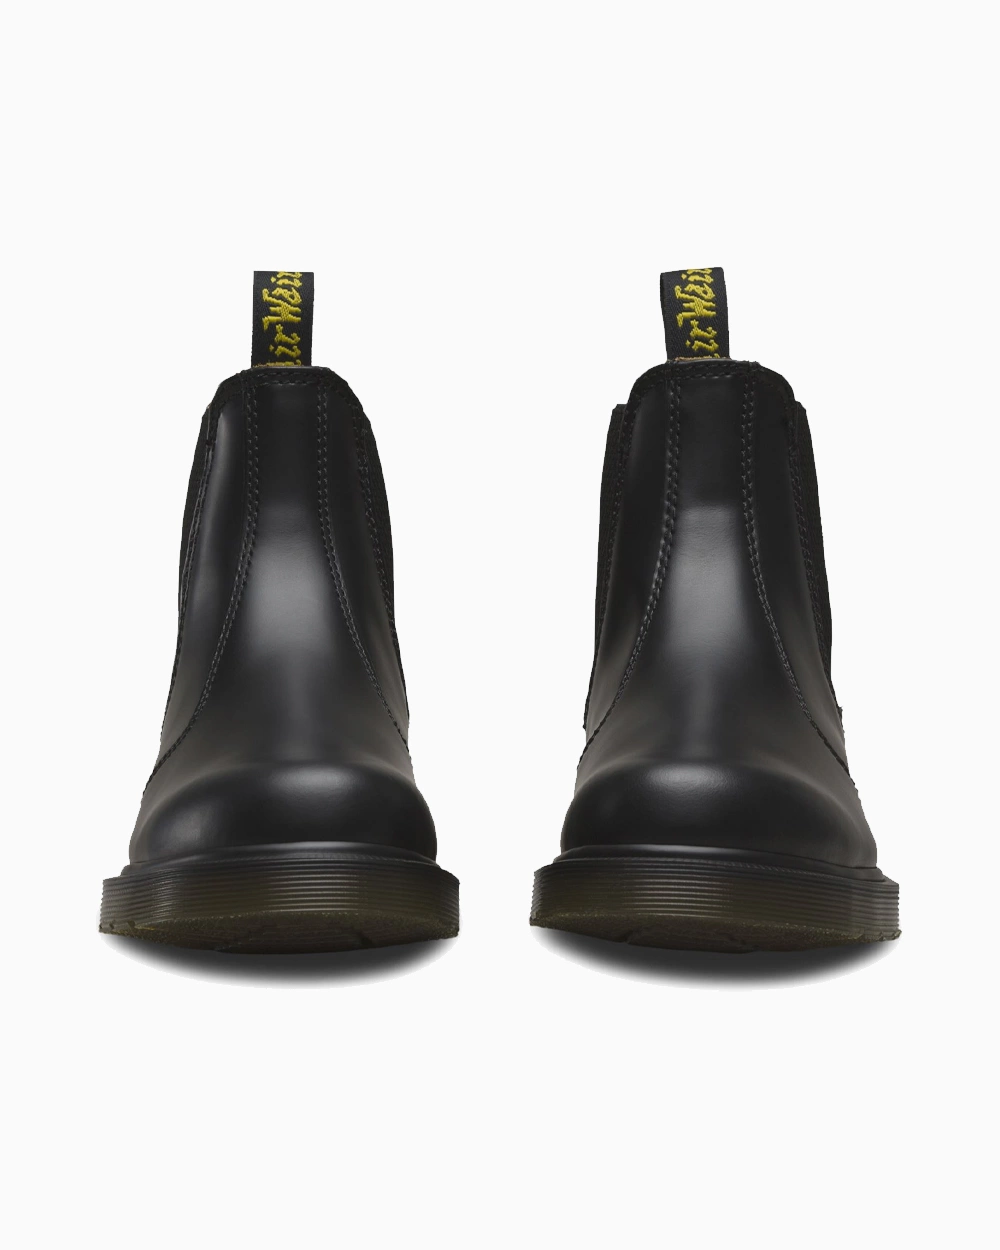 Dr. Martens: Ботинки Dr. Martens 2976 Smooth Chelsea Boots